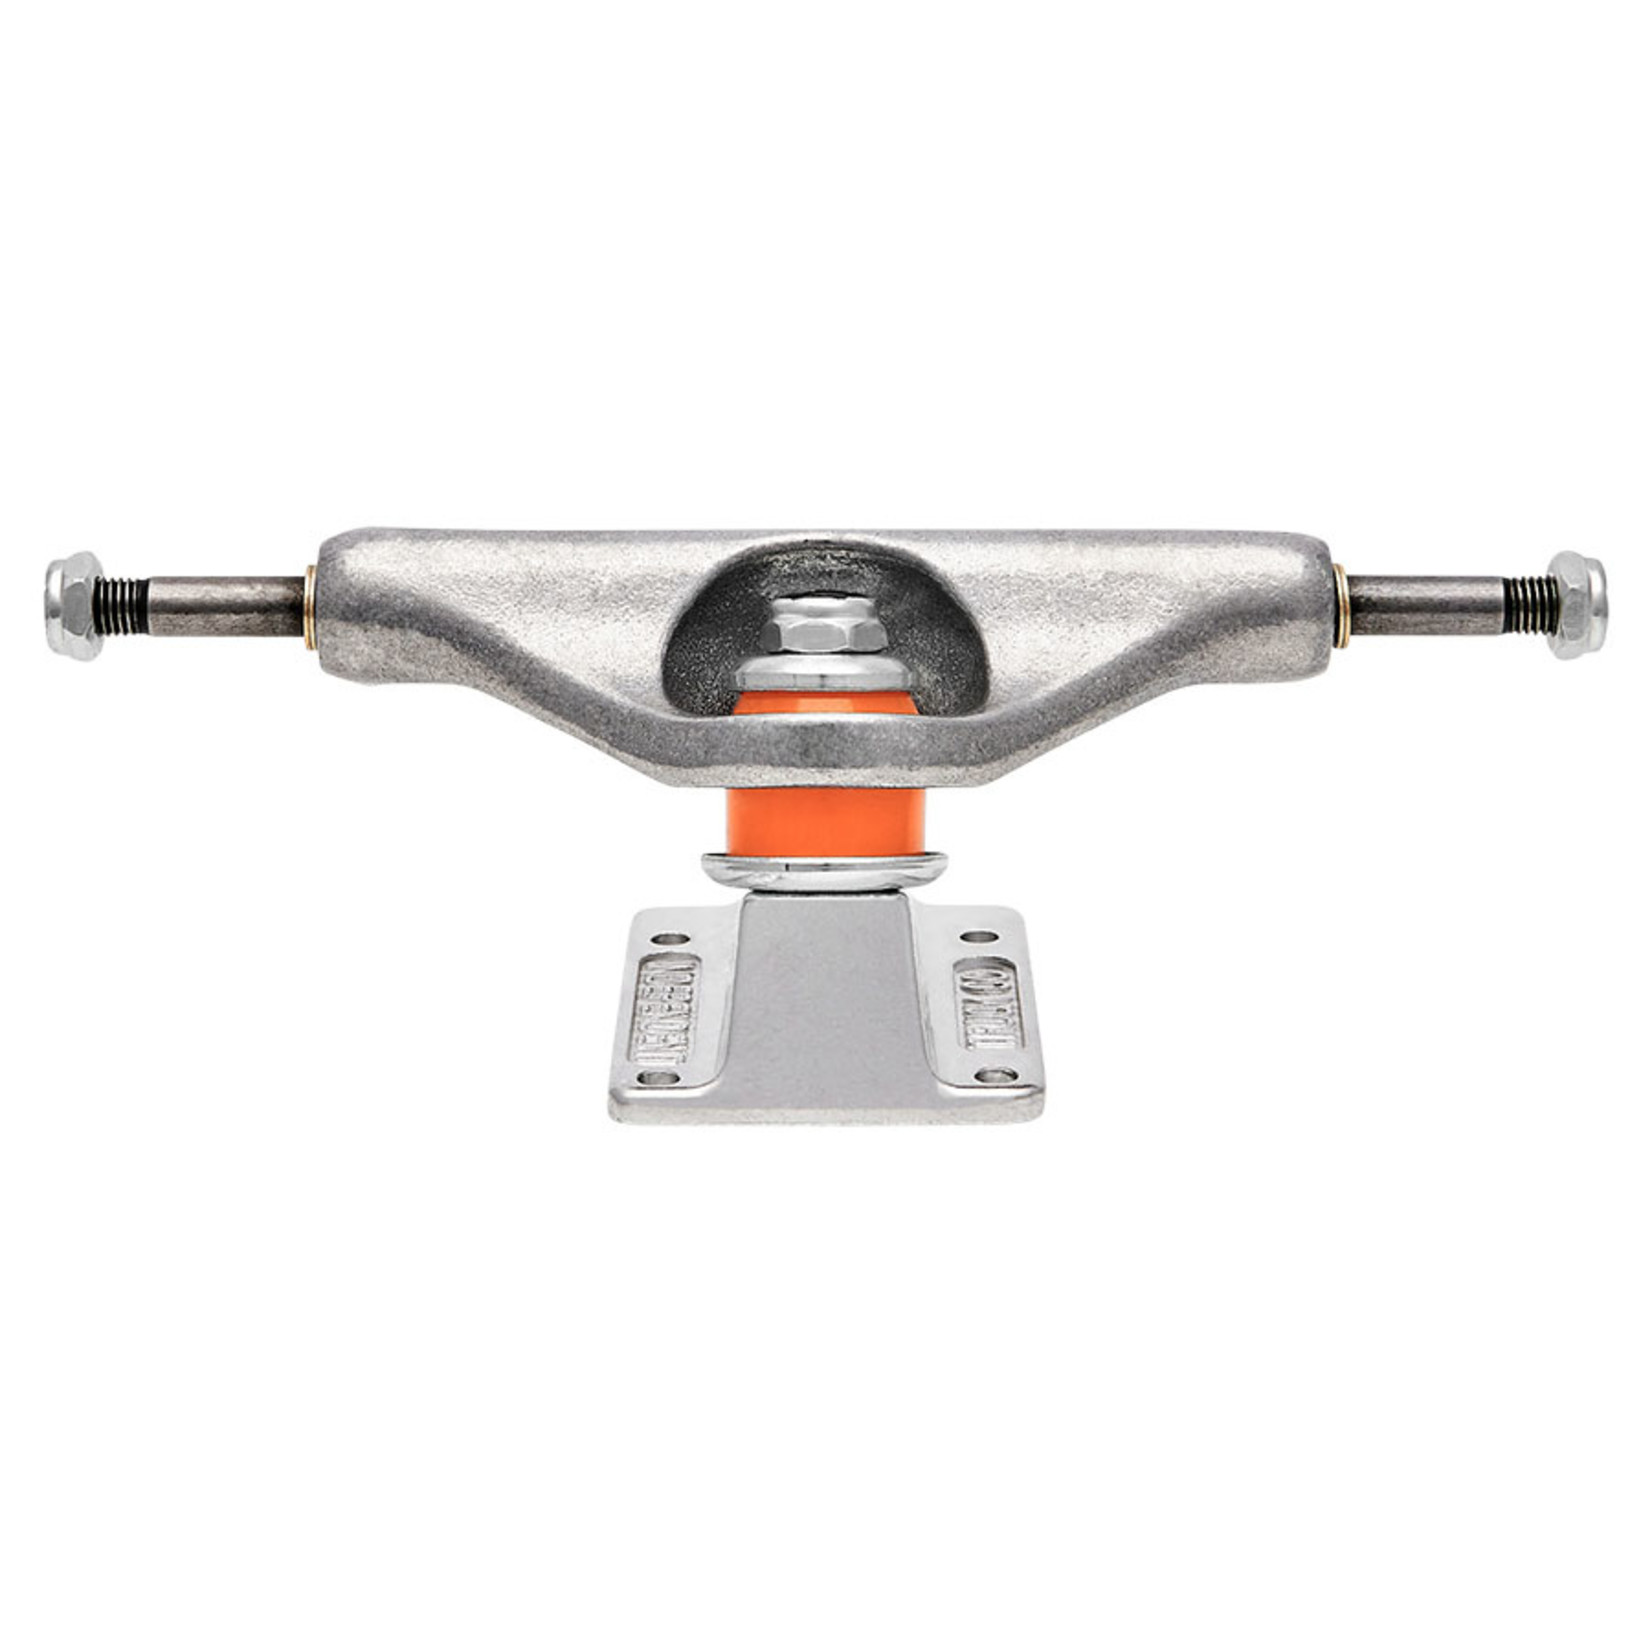 Independent Independent 149 Stage 11 Forged Hollow Silver Standard Trucks